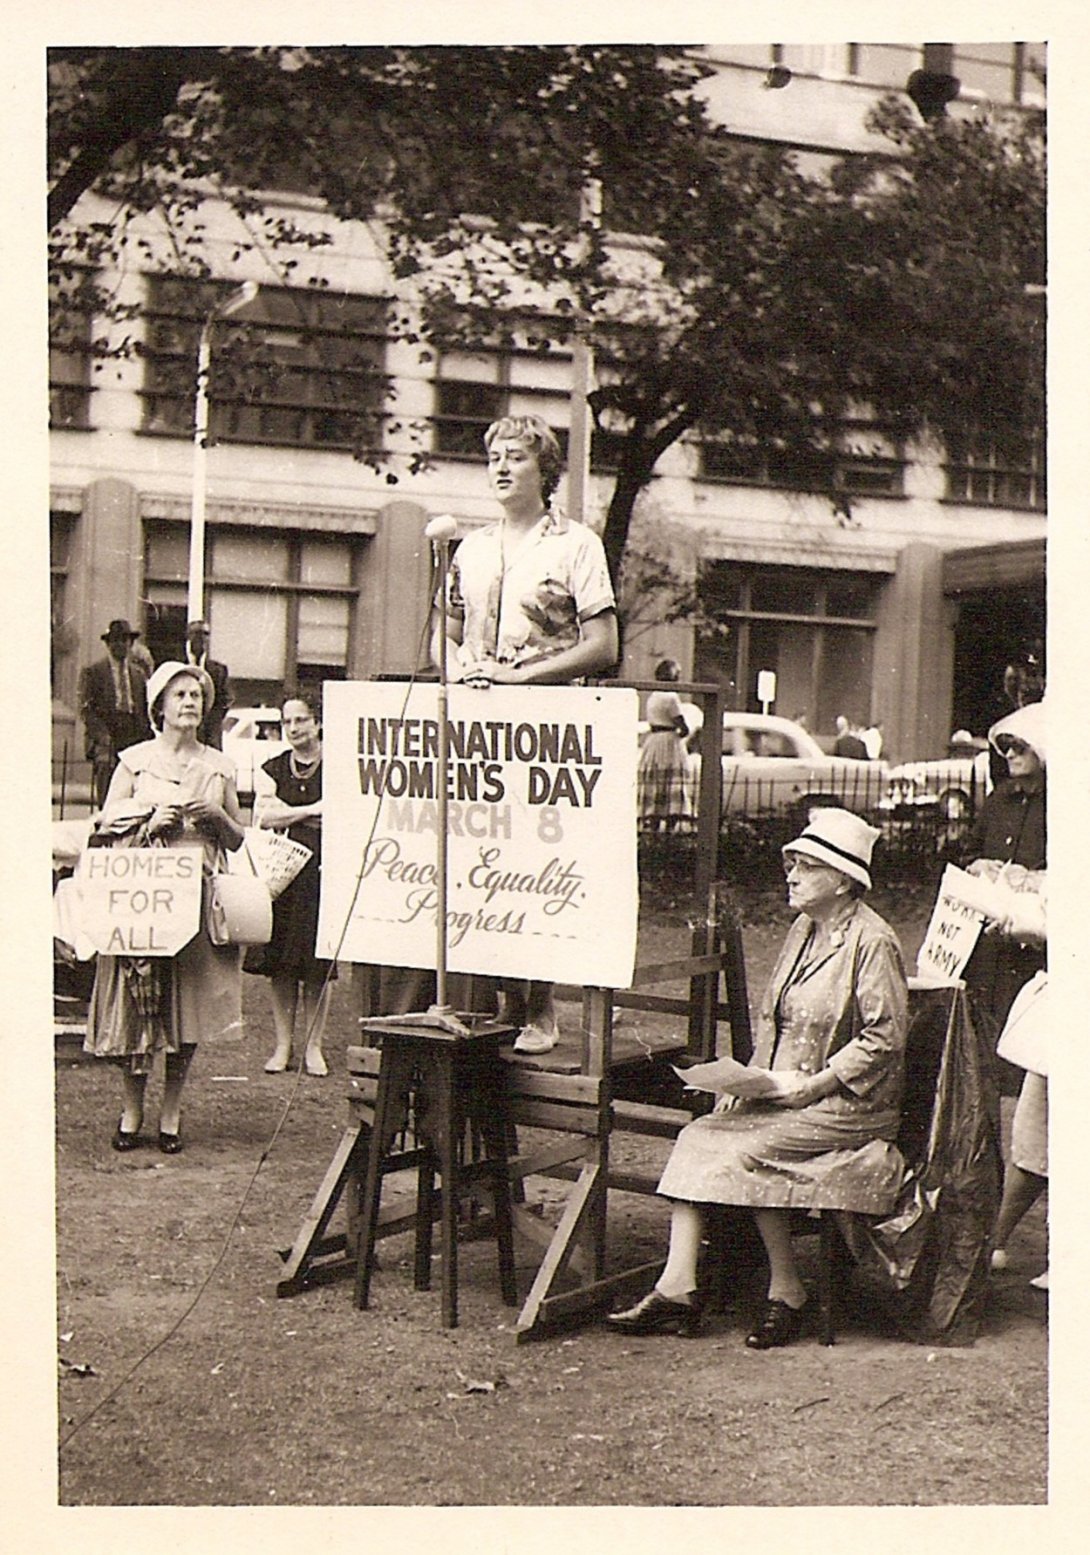 Woman on small wooden platform speaking into a microphone. In front of her is a sign that reads 'International Womens Day. March 8. Peace. Equality. Progress.' A few women stand and sit around her listening.